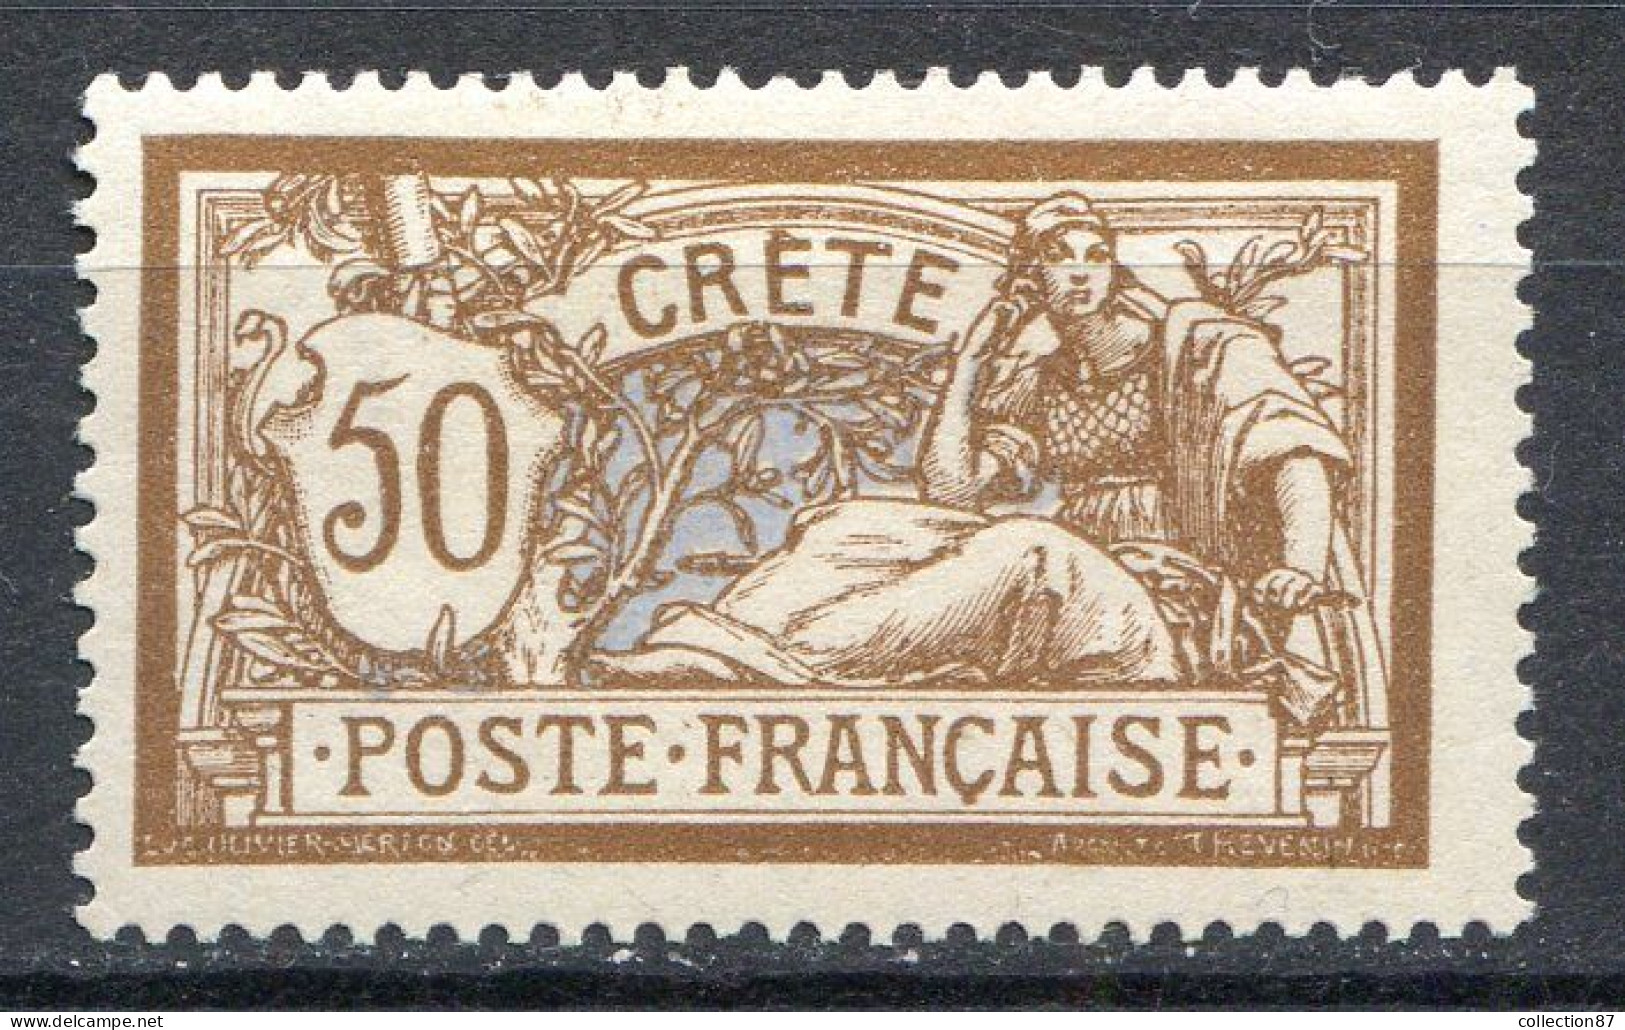 Réf 76 CL2 < -- CRETE < N° 12 * NEUF Ch. * MH -- > - Unused Stamps